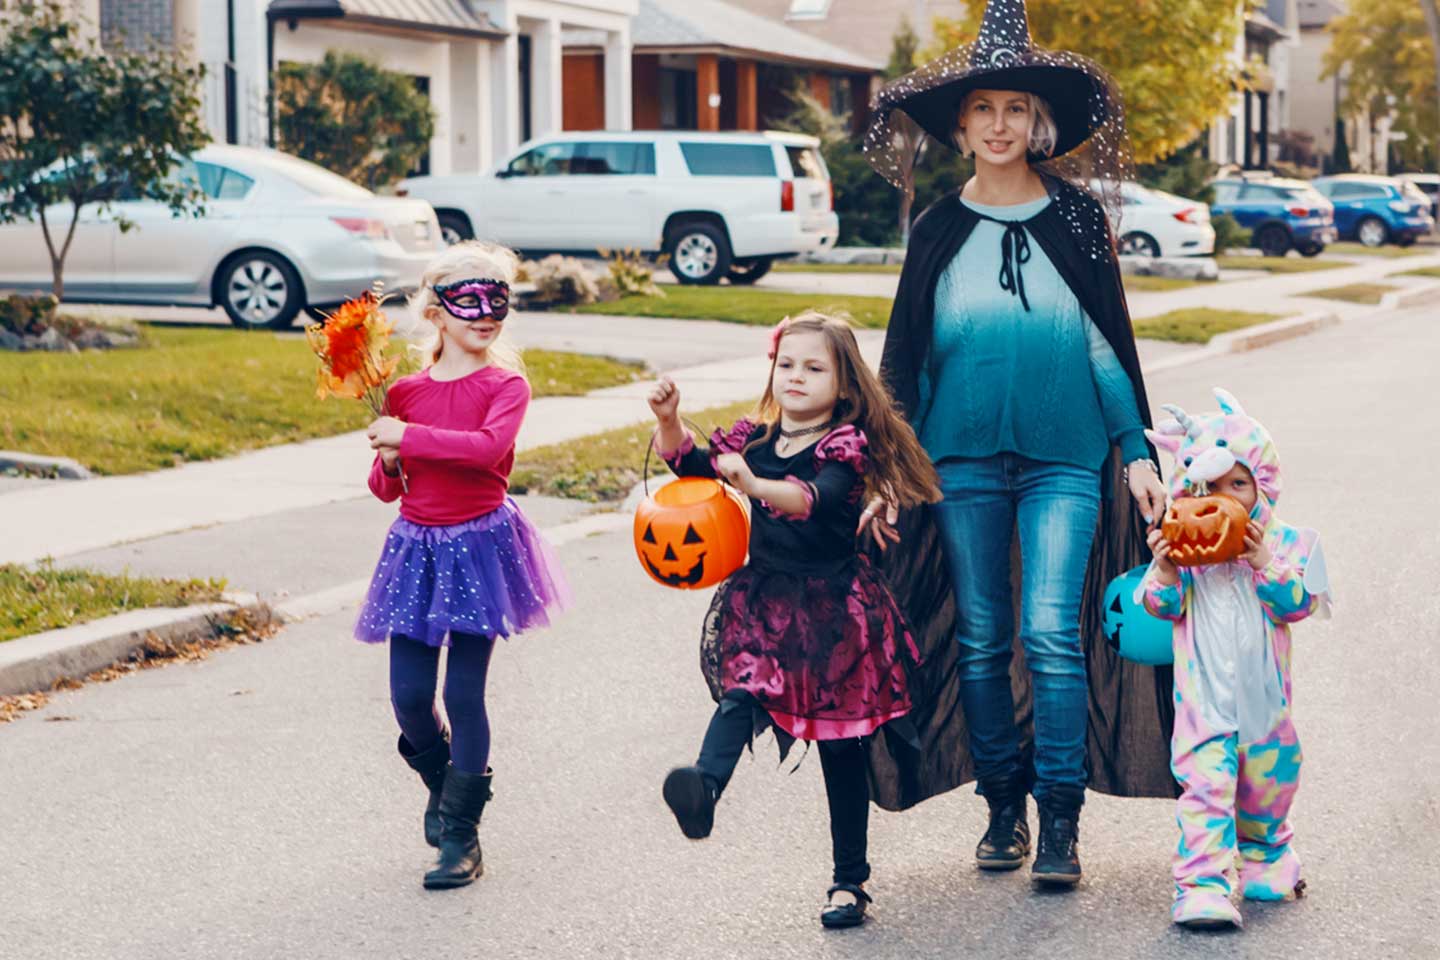 Mother with children going to trick or treat on Halloween holiday